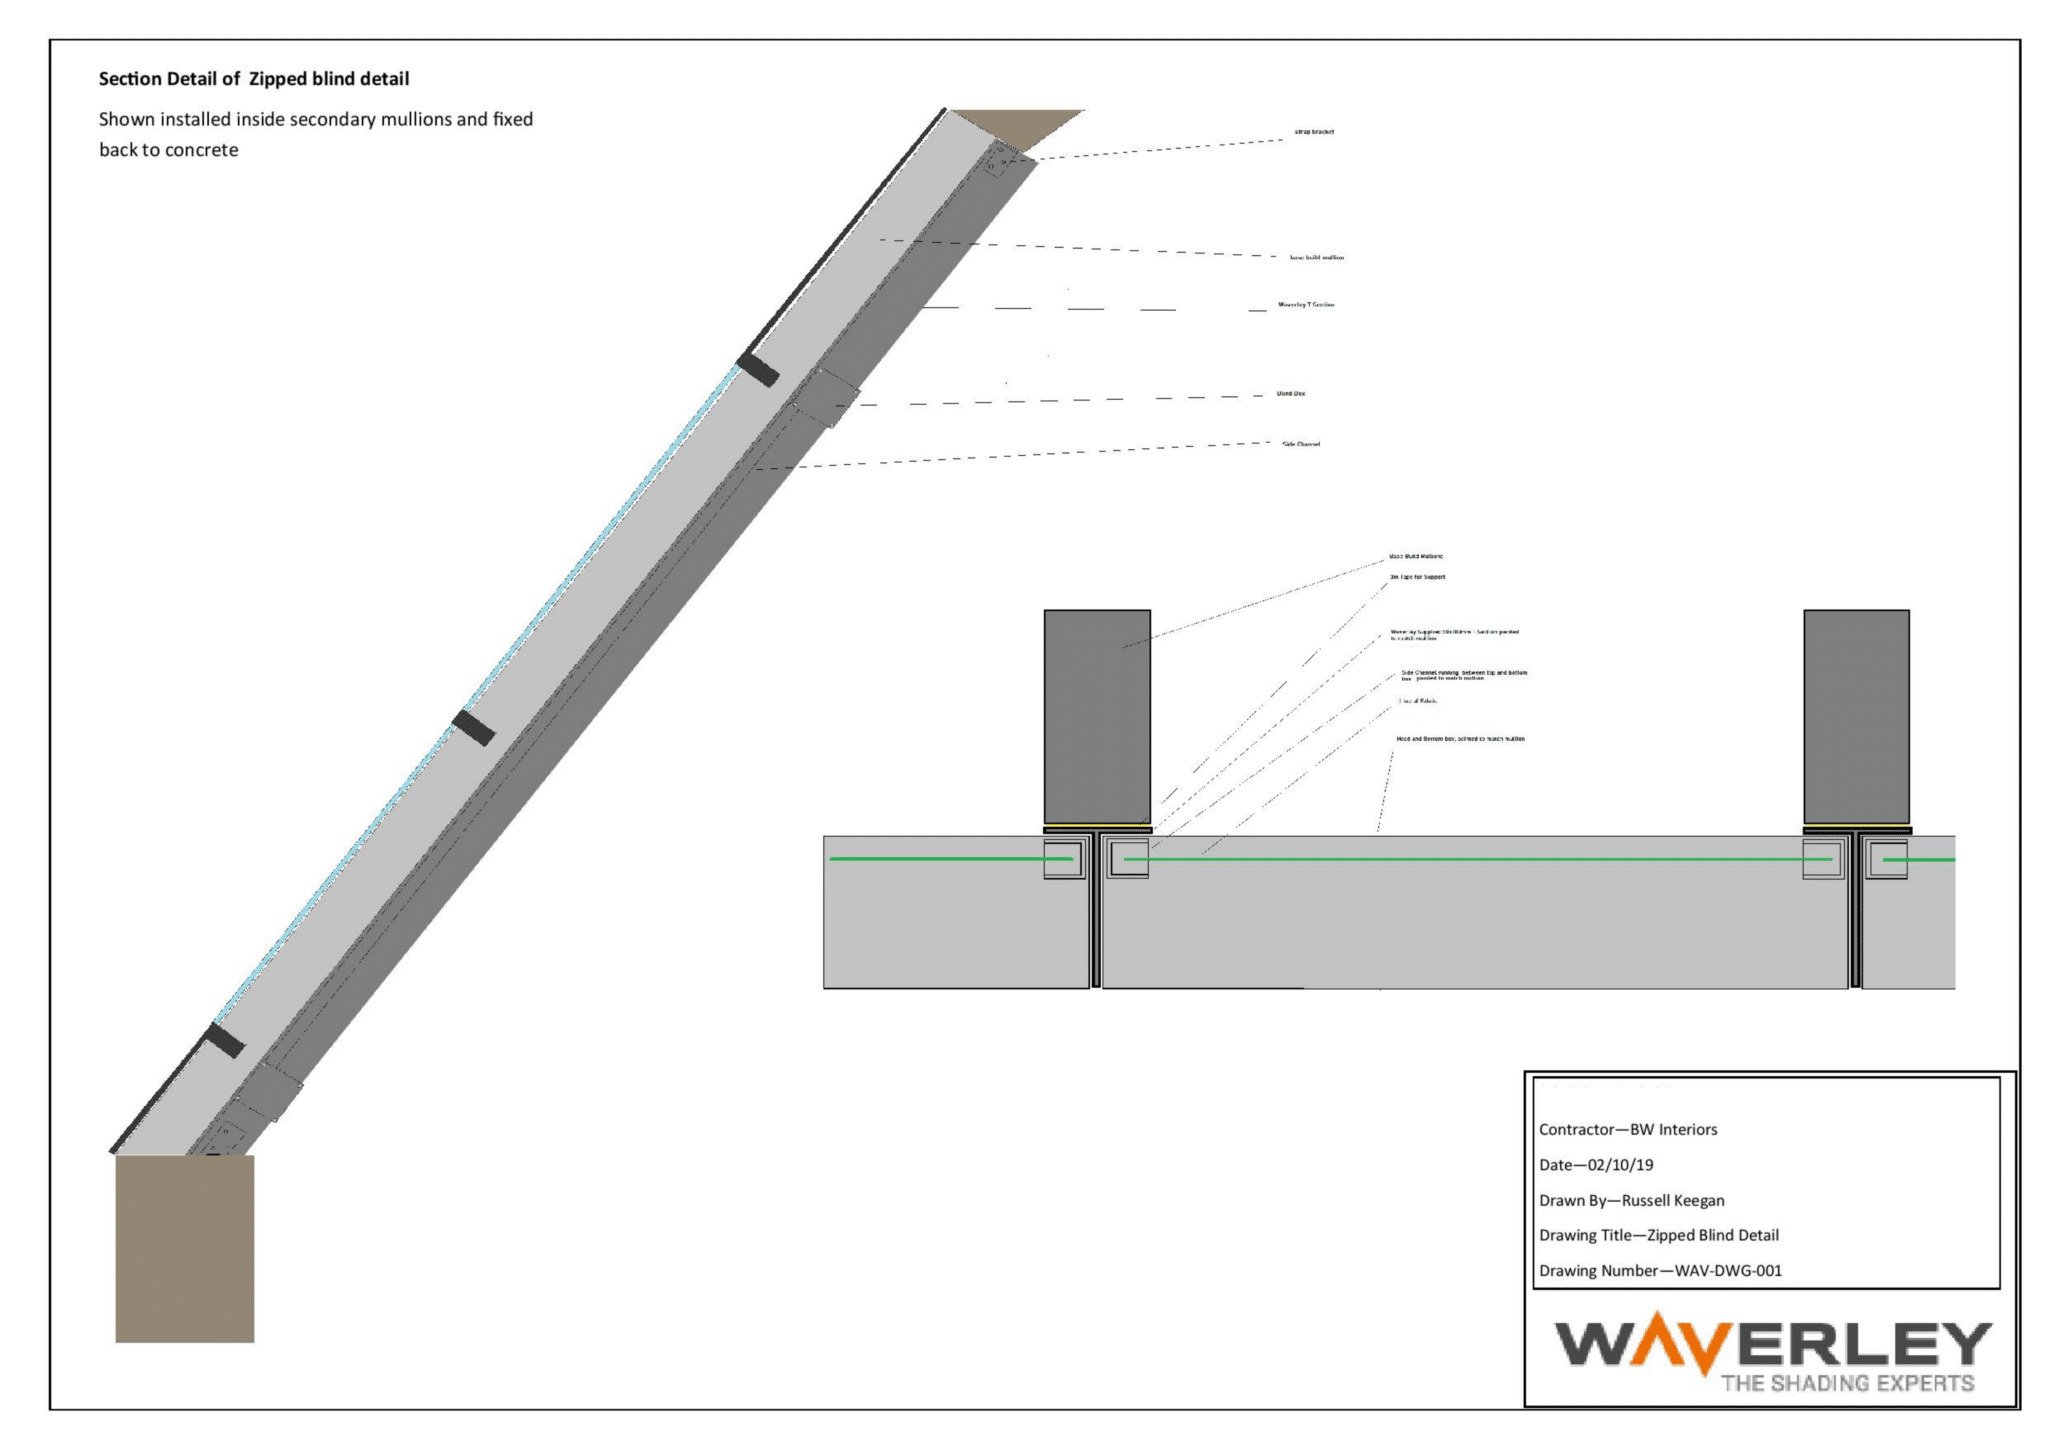 WAV DWG 001 Zipped Blind Detail - Confidential Fit Out Project